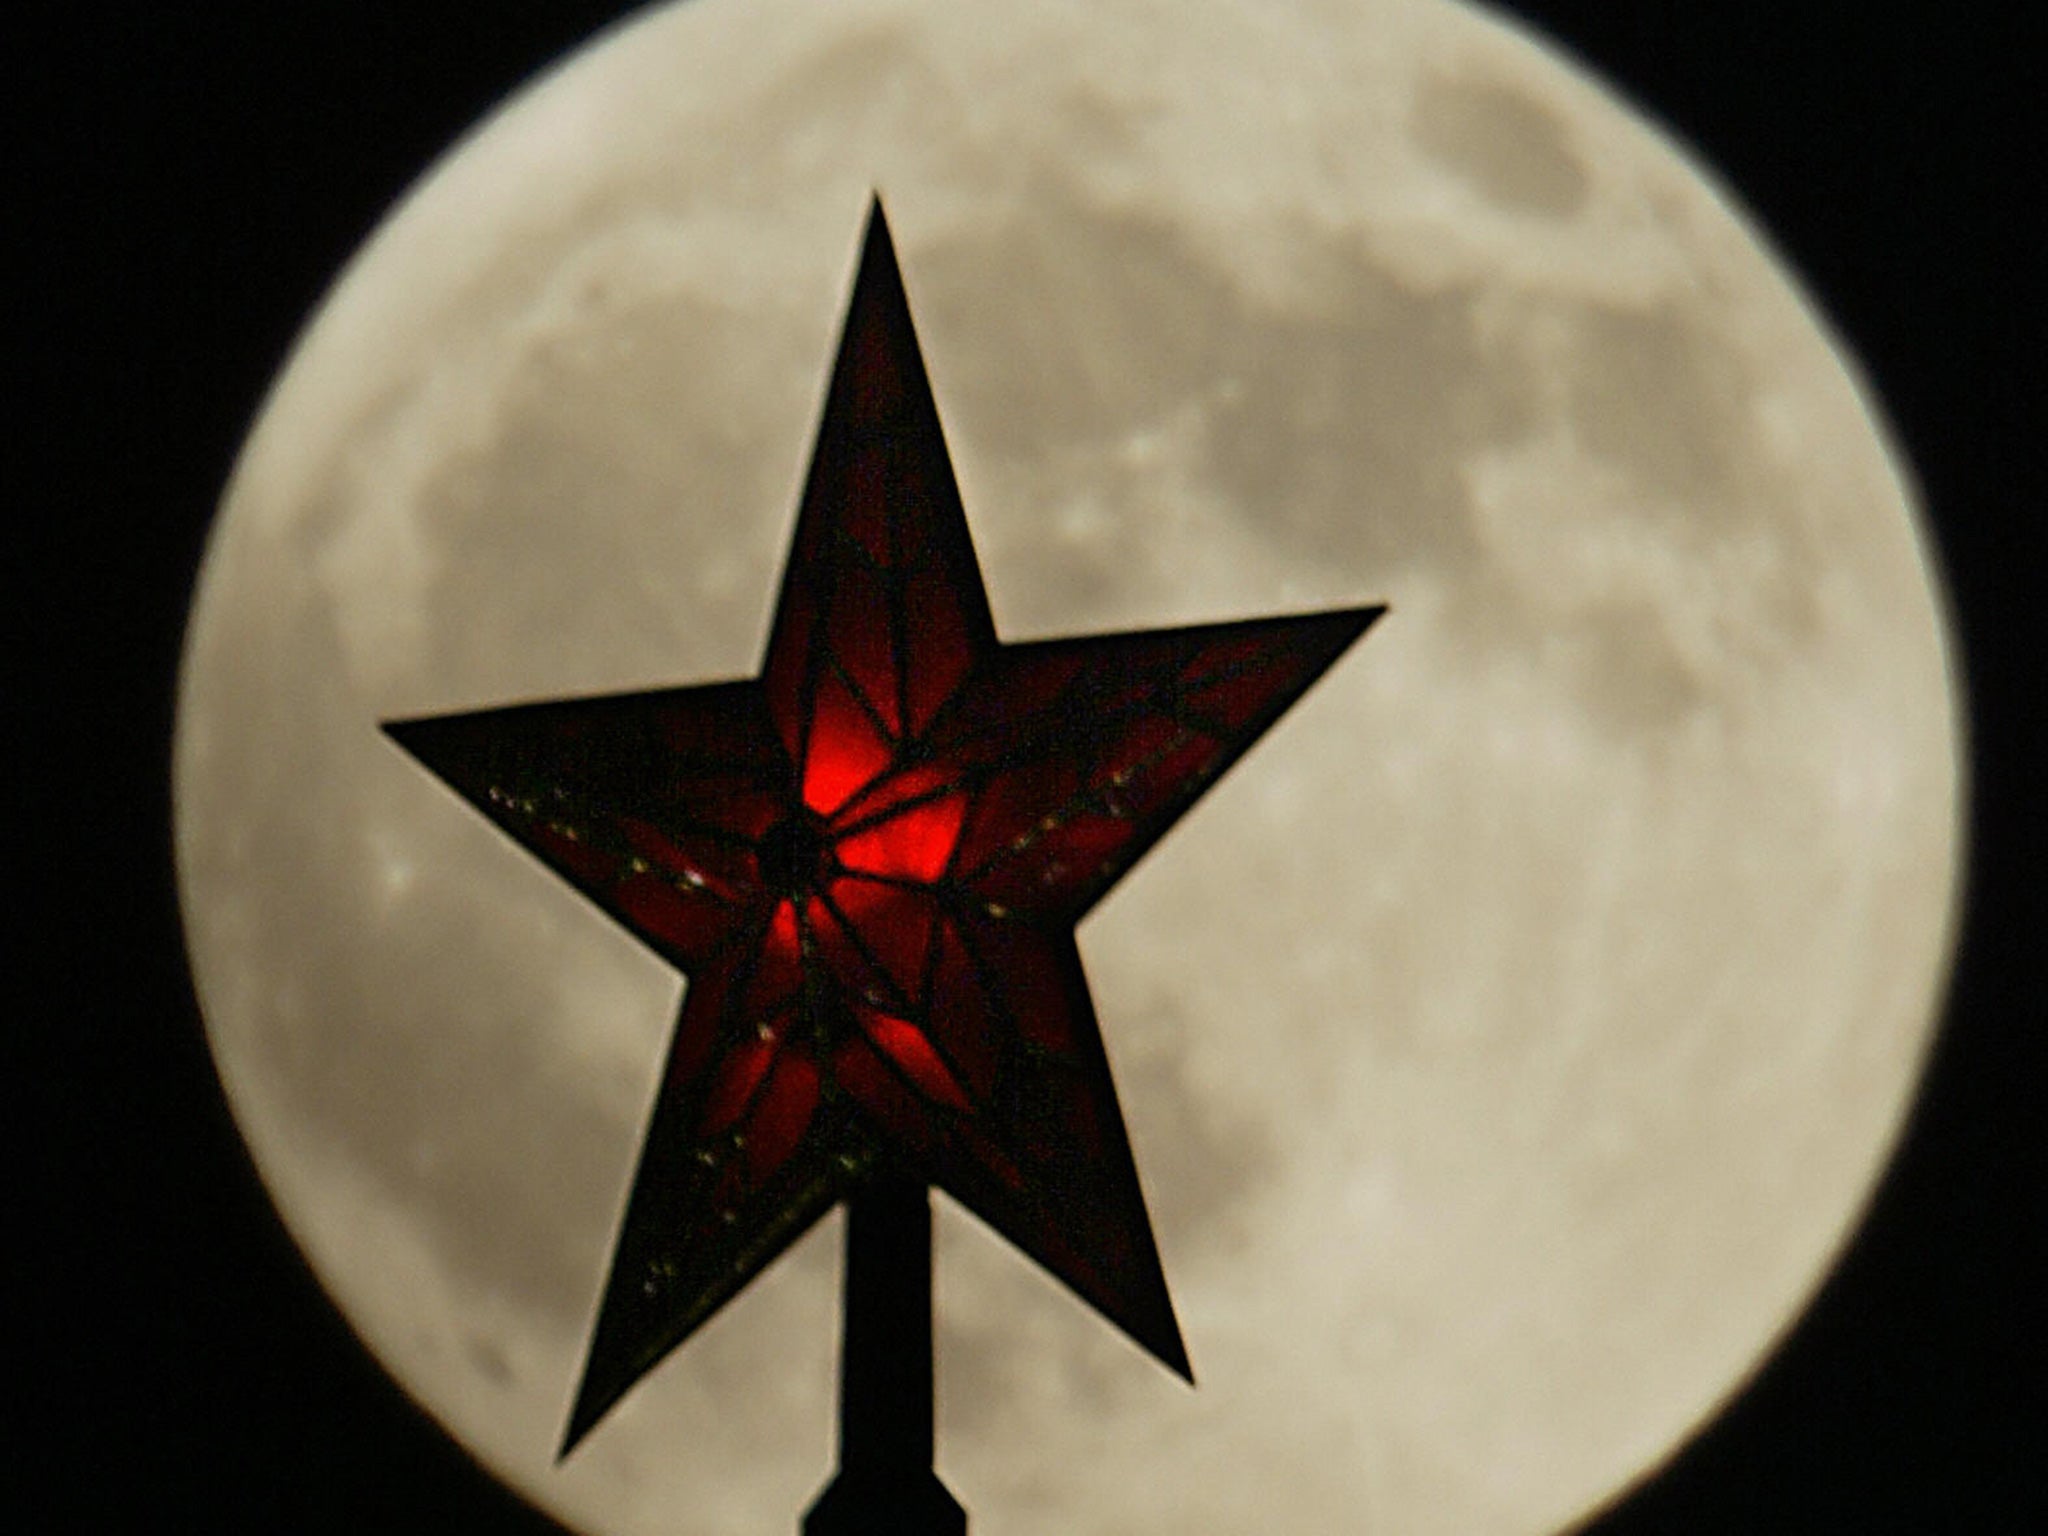 One of the Ruby stars of the Kremlin towers in Moscow is silhouetted by a full moon